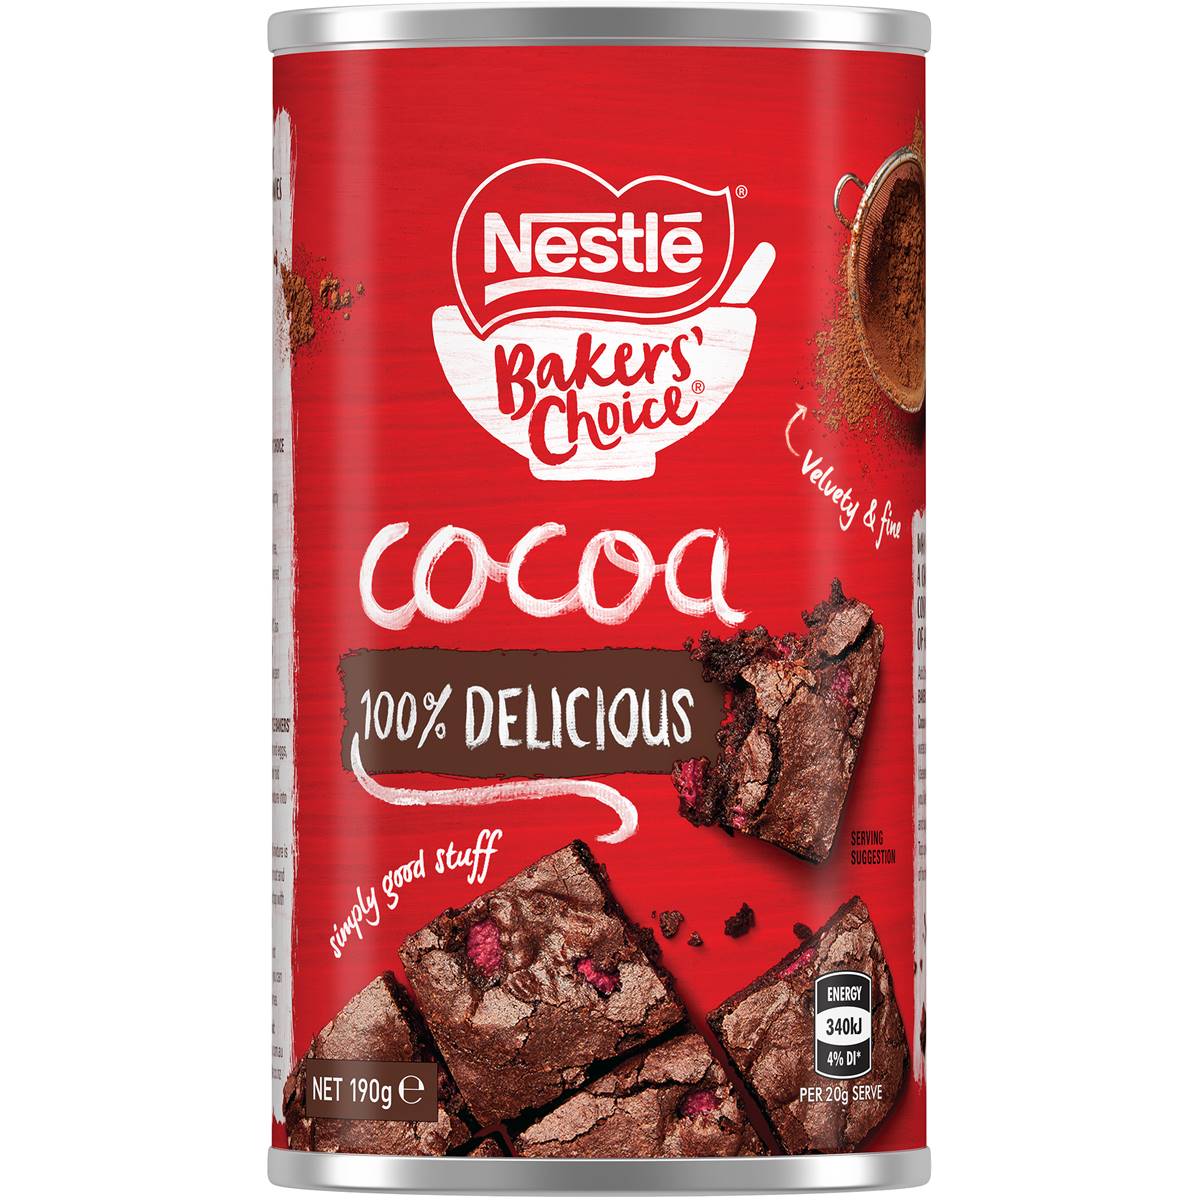 Calories in Nestle Bakers Choice Cocoa